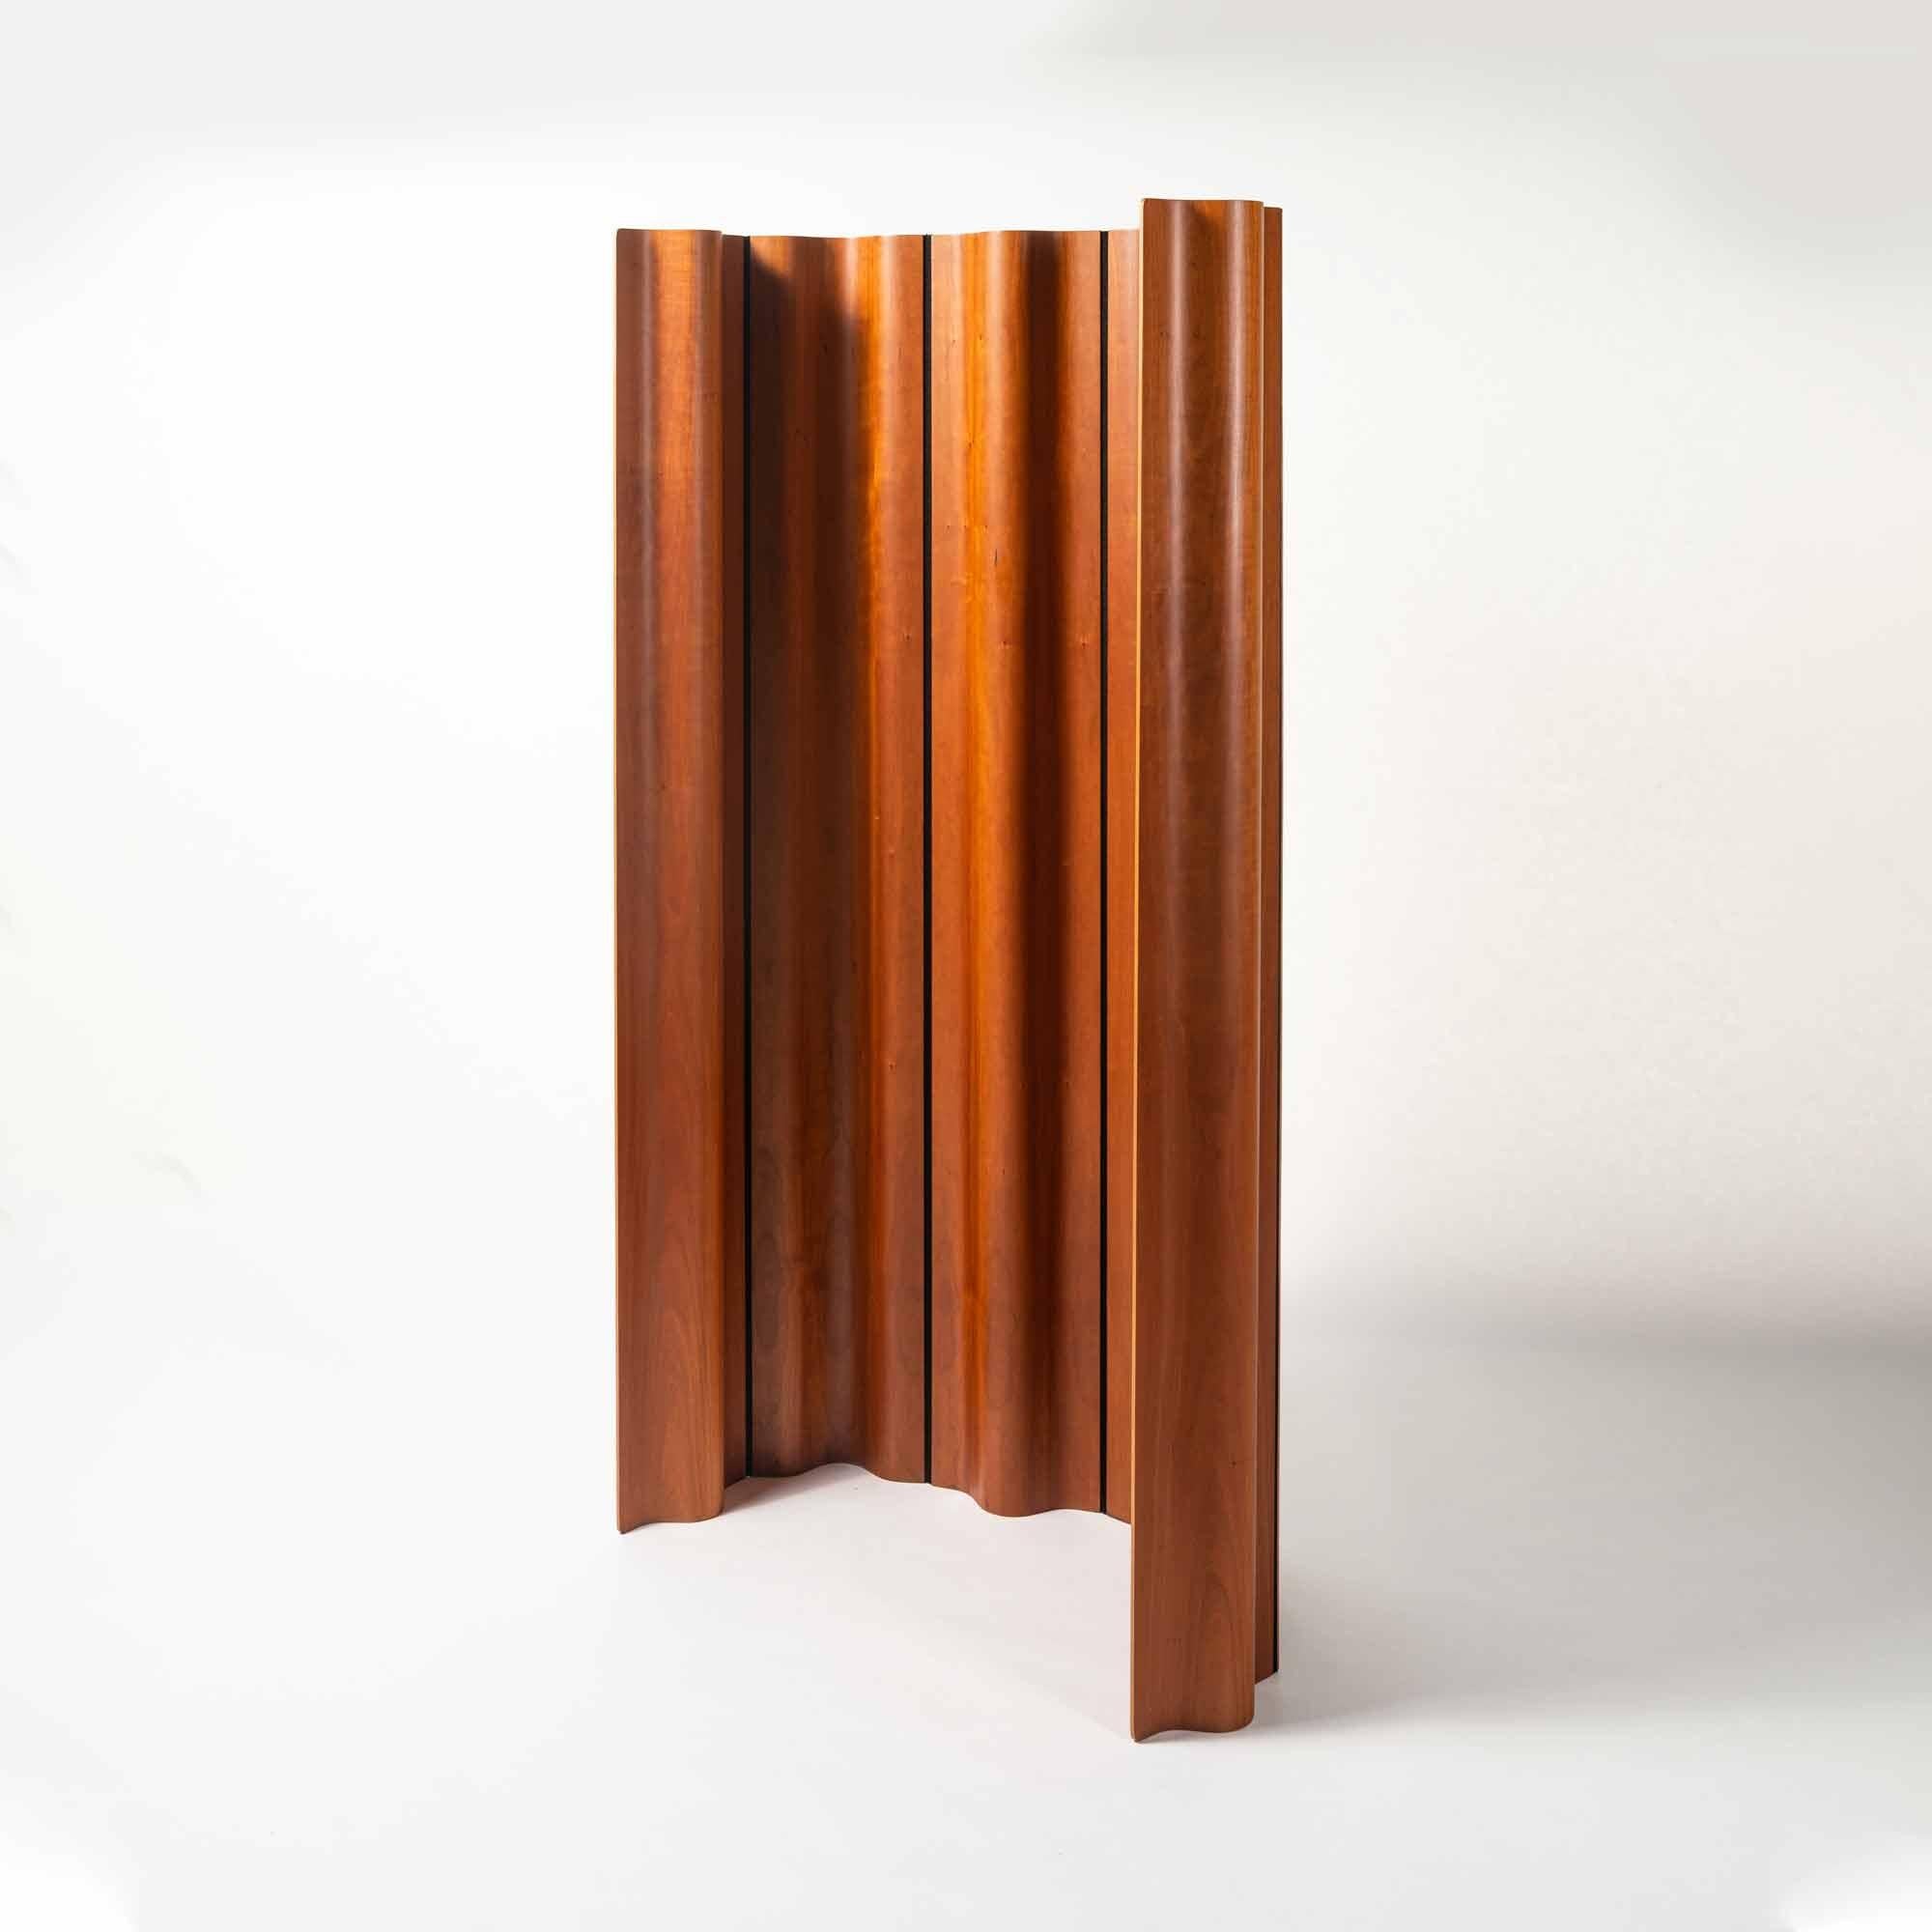 Newer edition of the Eames folding screen (FSW-6) in cherry wood, circa 1990s. The design of the screen was a clever combination of molded plywood panels and a flexible cotton canvas band in between each. The panels were shaped to the same exact